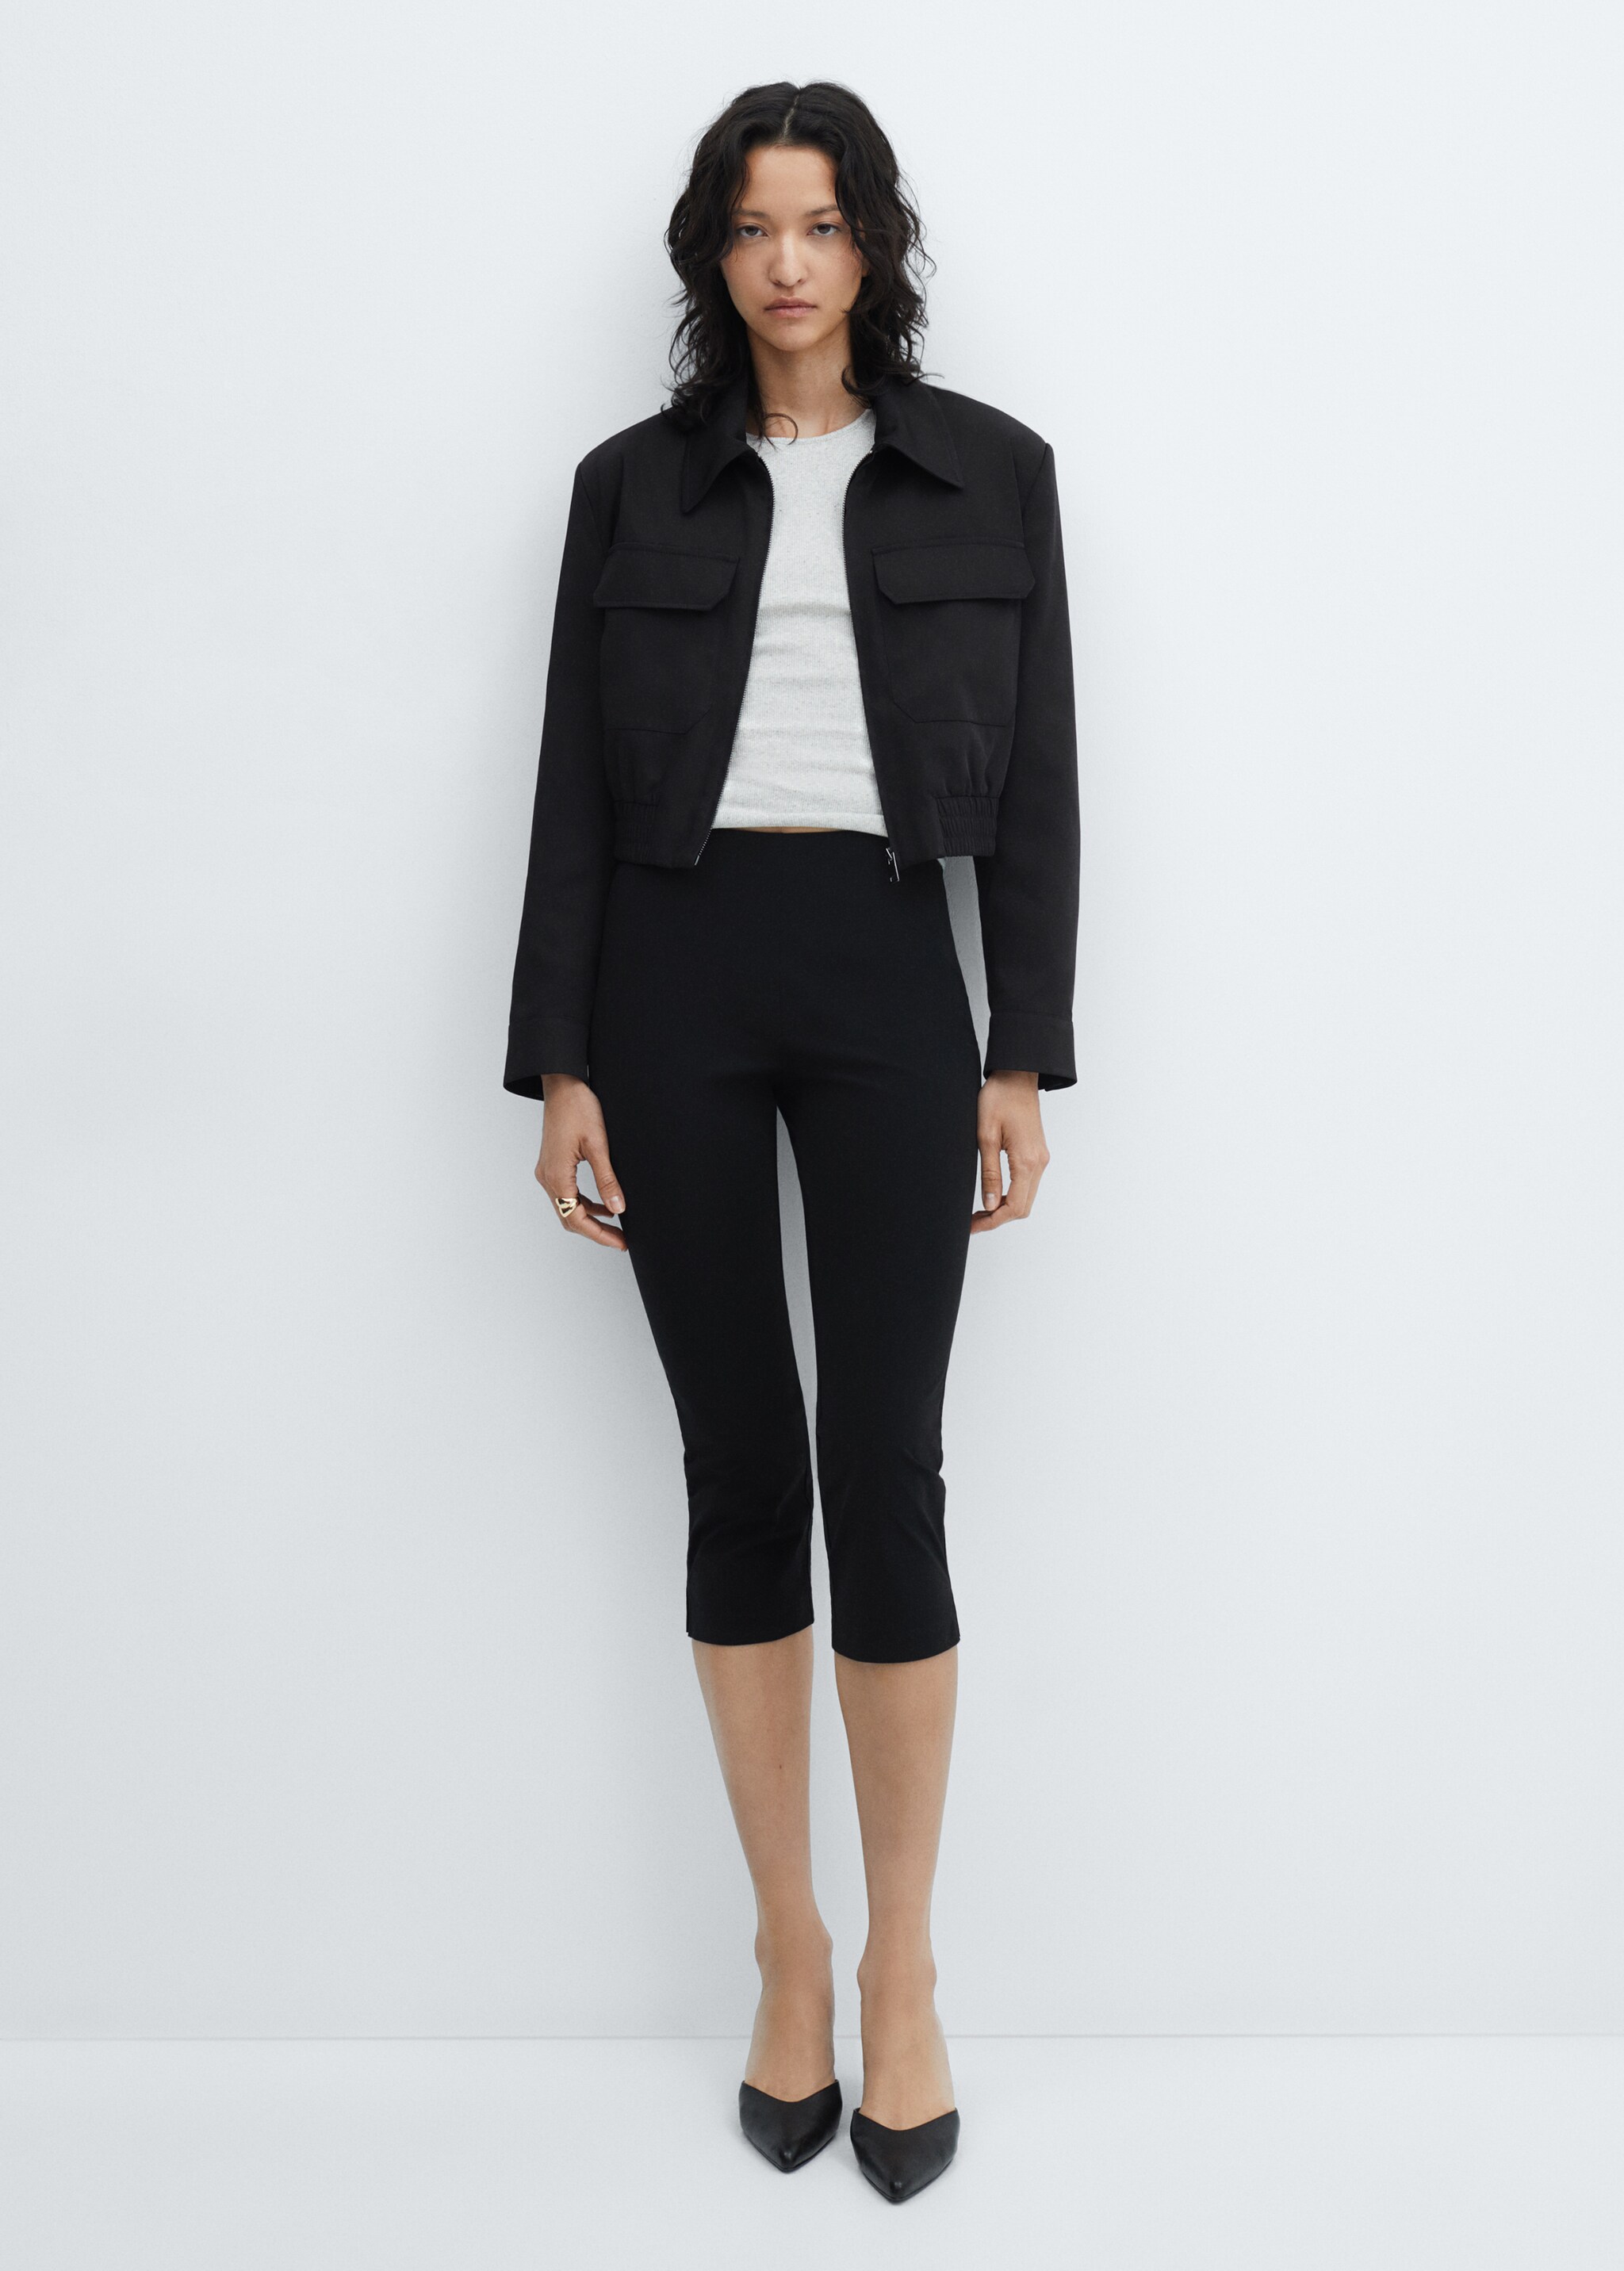 Cropped jacket with pockets - General plane